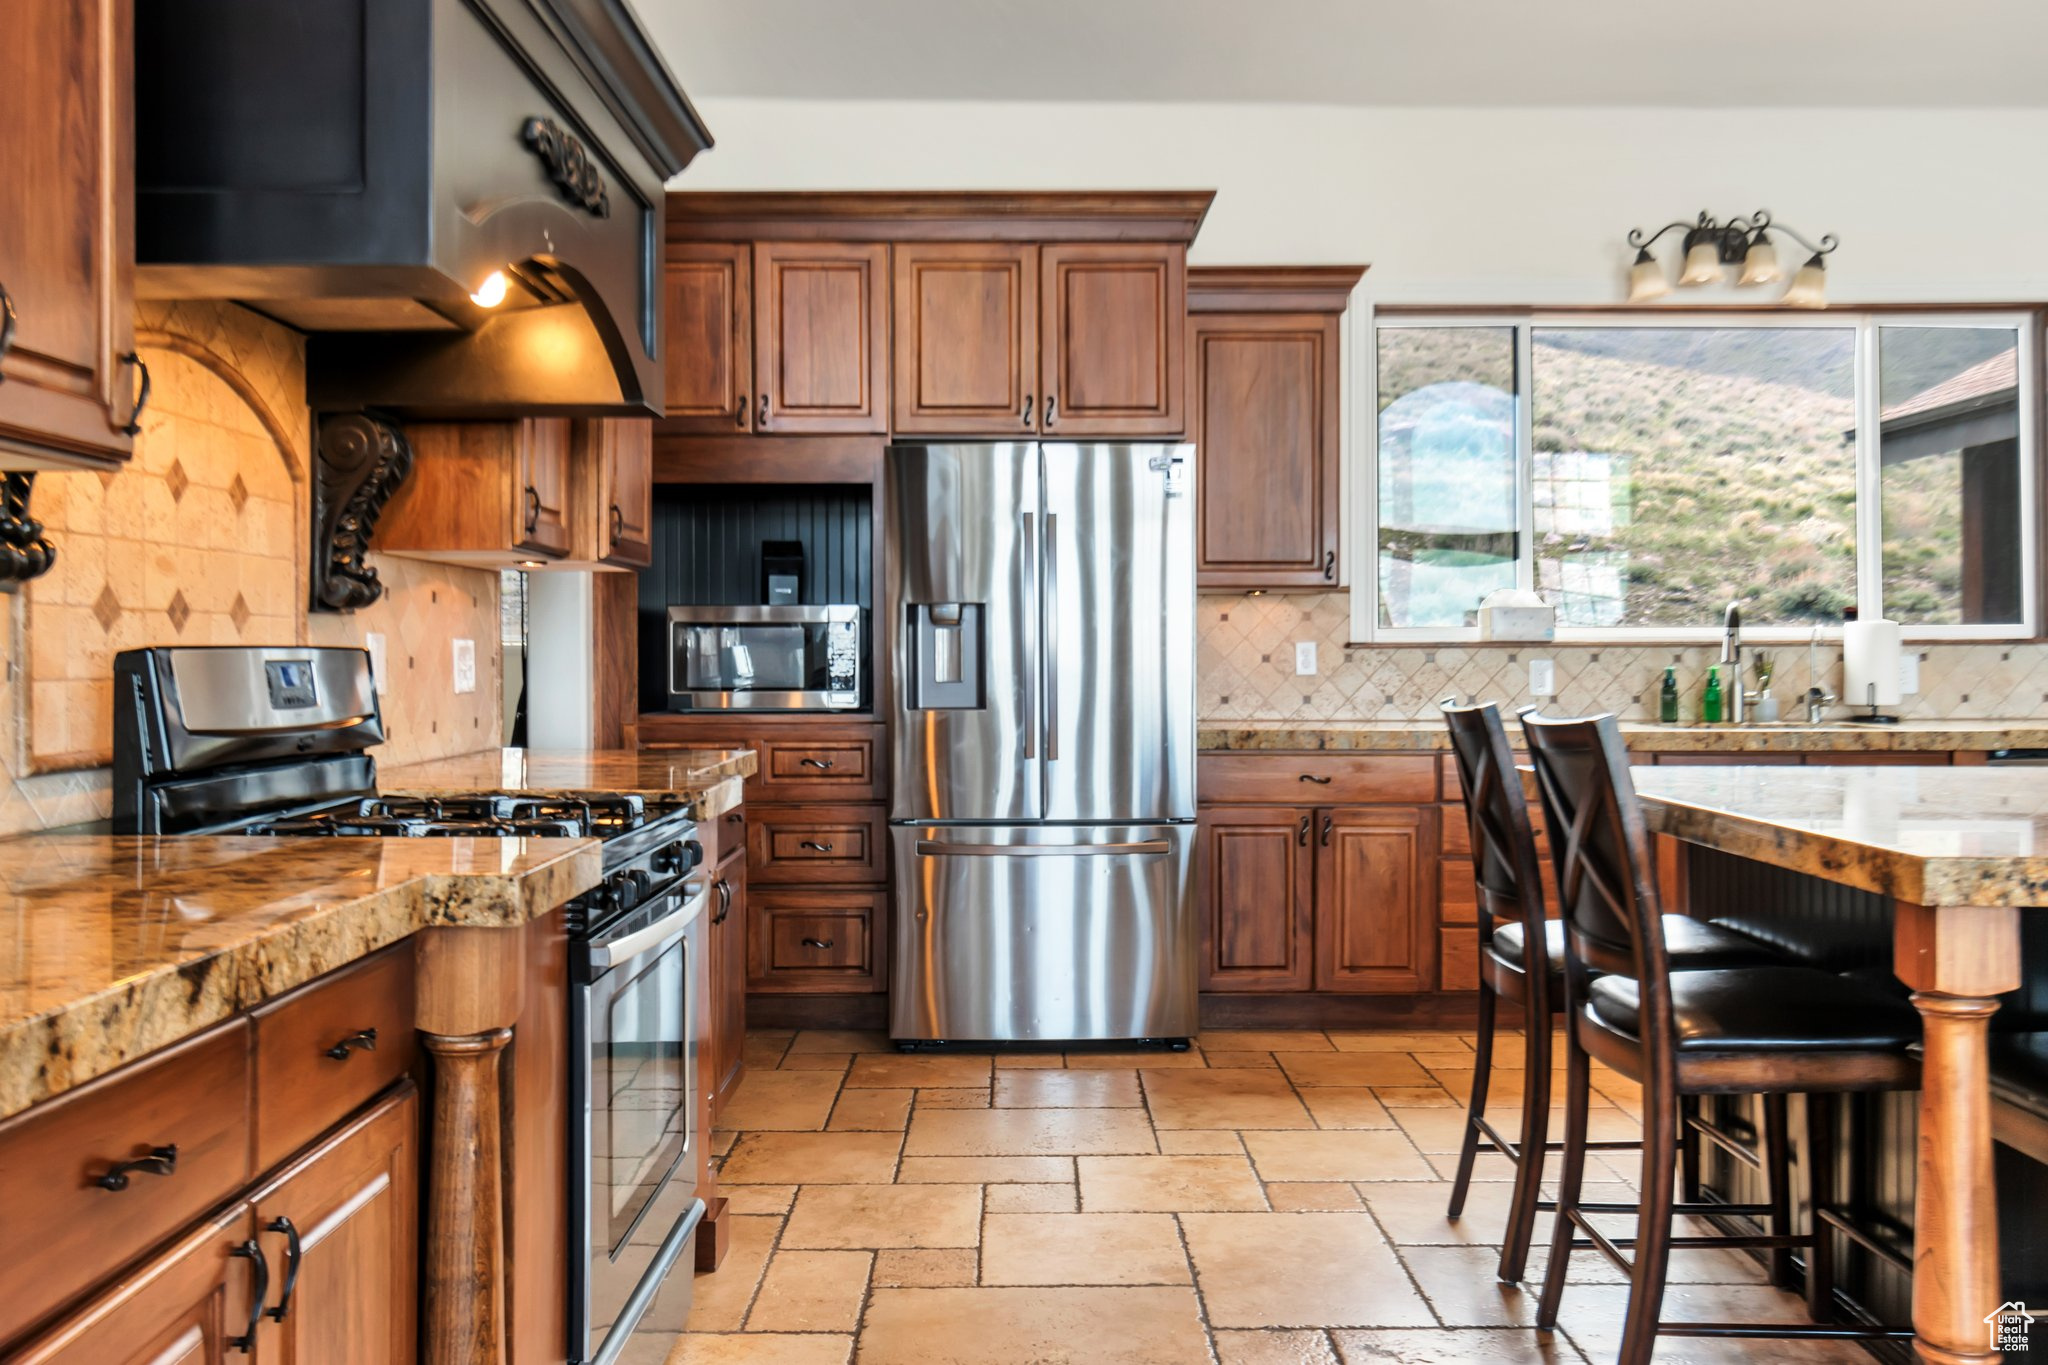 Kitchen with appliances with stainless steel finishes, sink, light tile flooring, backsplash, and a breakfast bar area